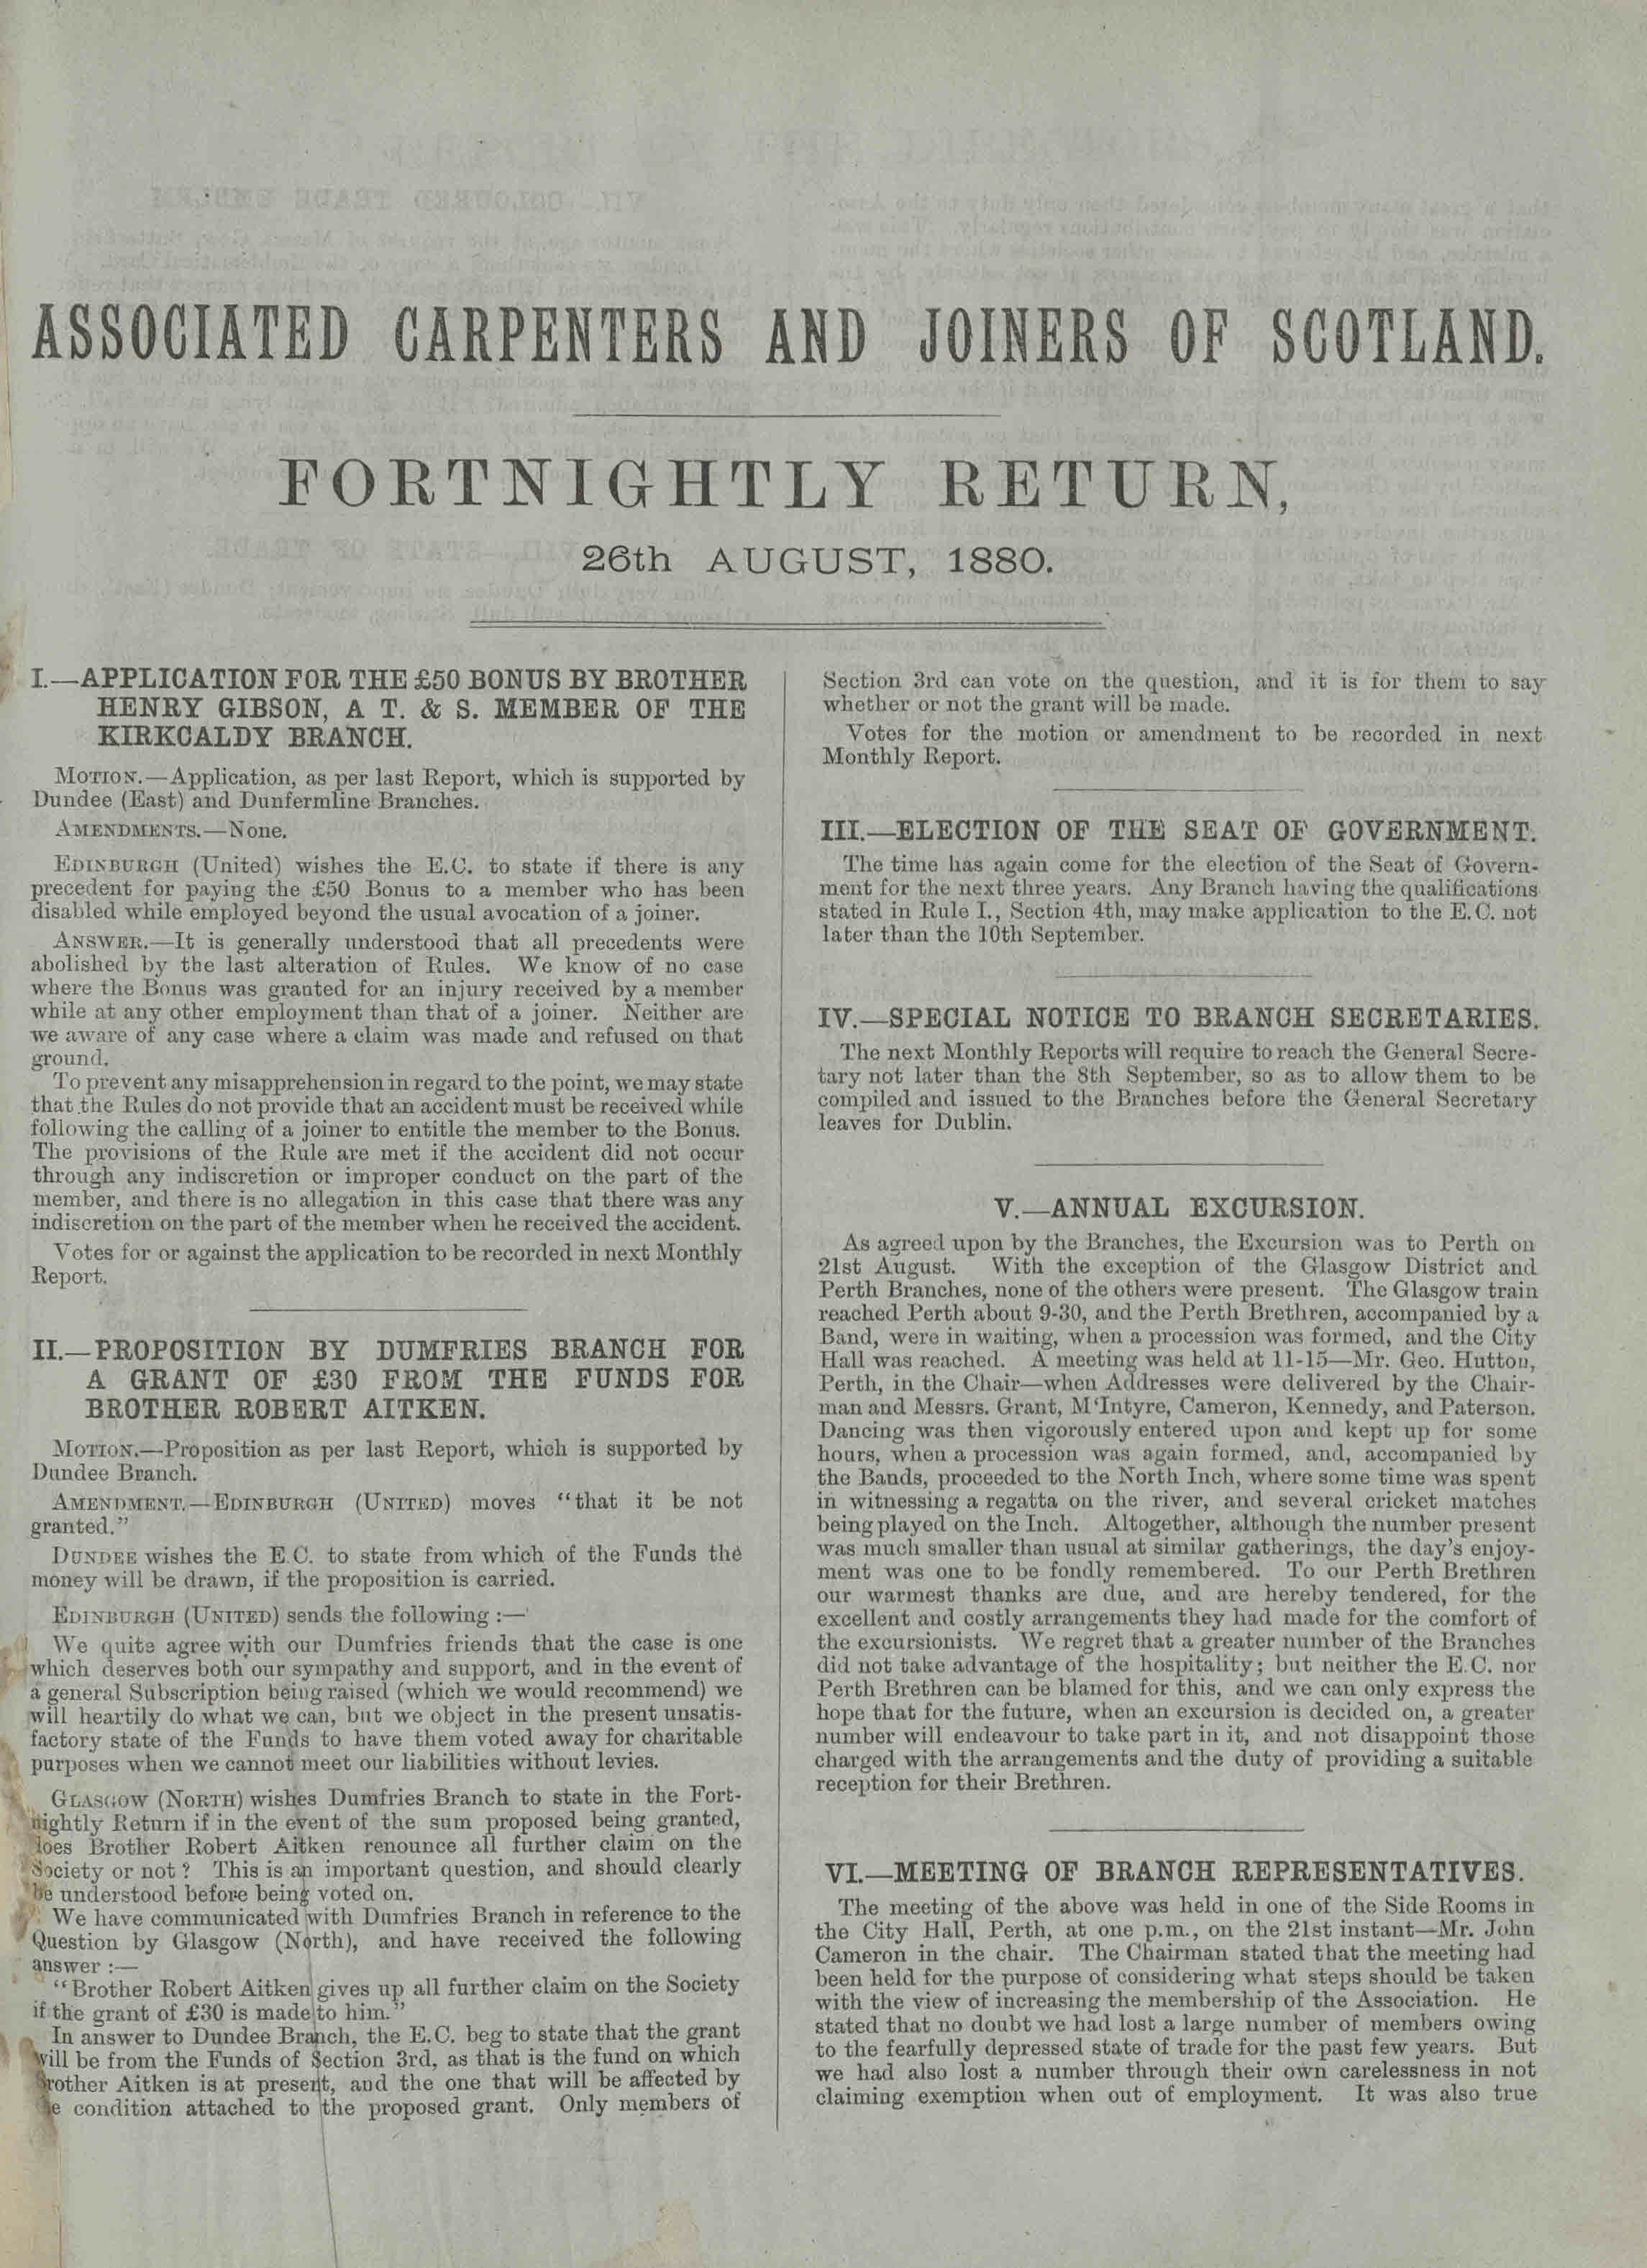 Front page of the fortnightly return for 26 August 1880, it includes information about grants to members and an annual excursion